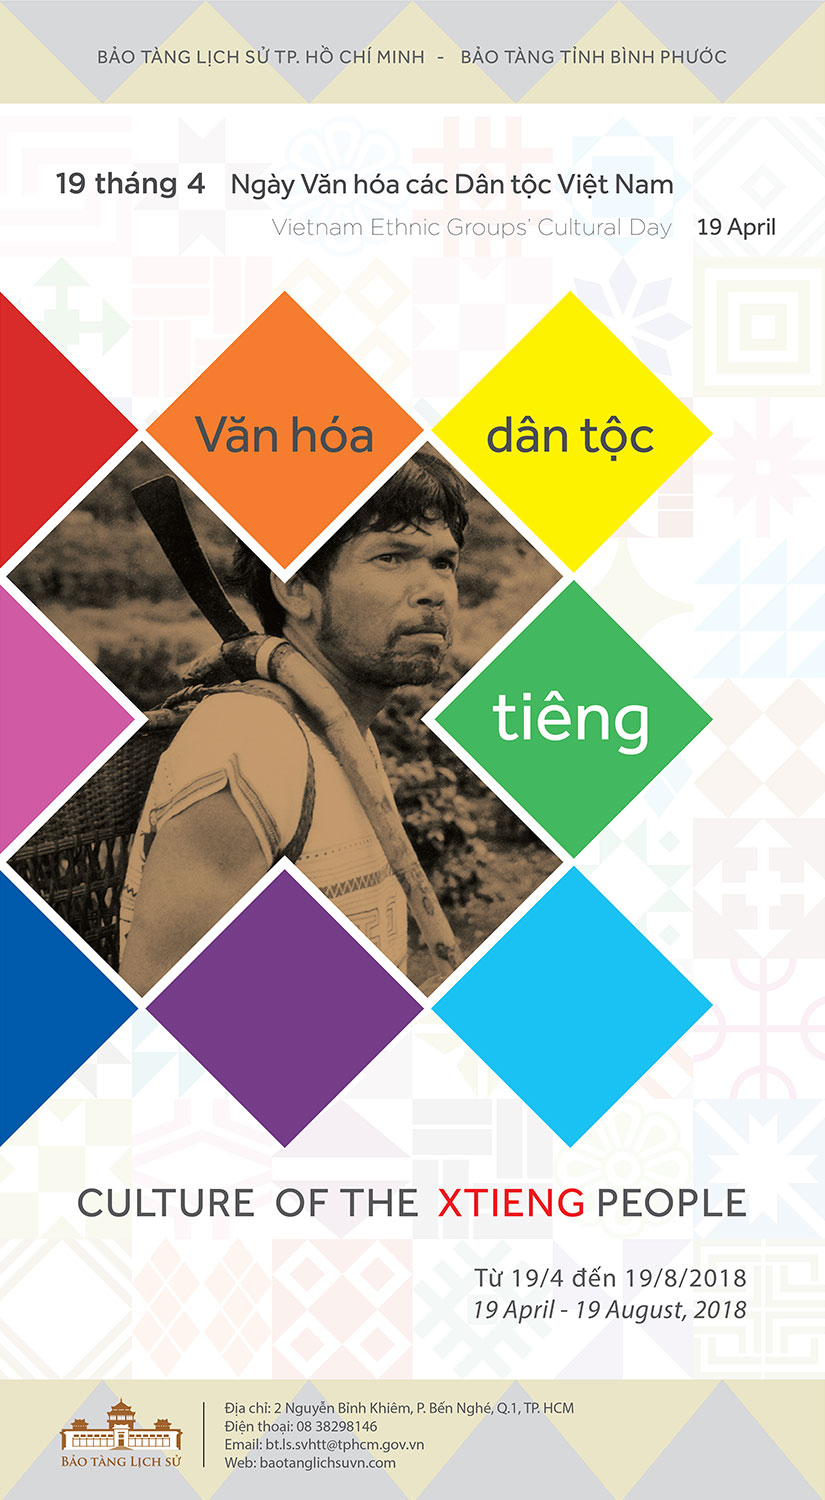 Culture of the Xtieng people